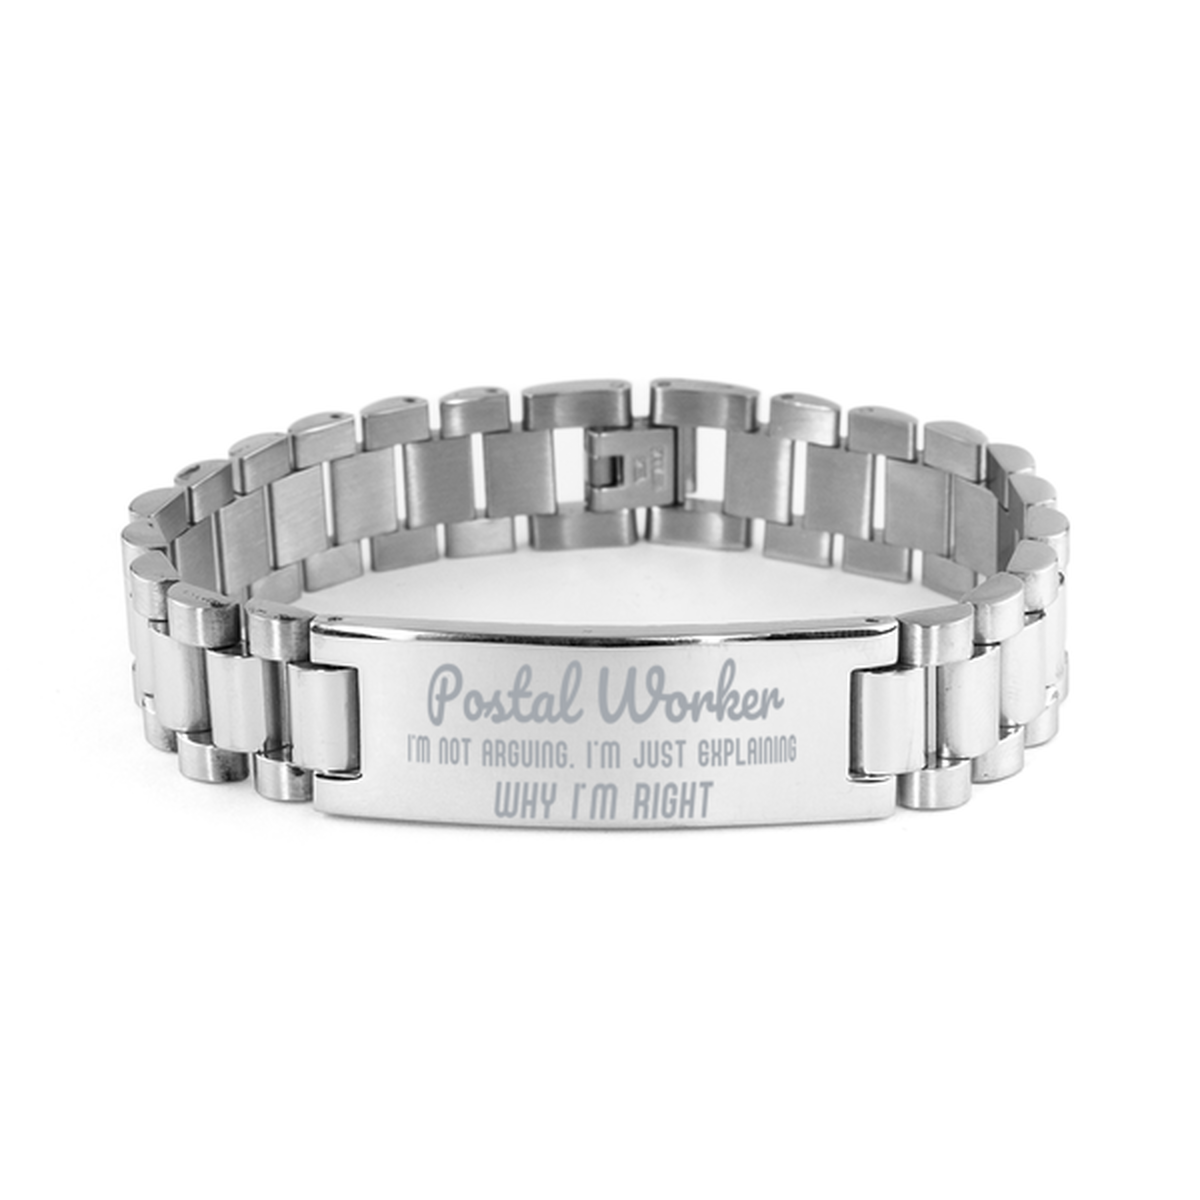 Postal Worker I'm not Arguing. I'm Just Explaining Why I'm RIGHT Ladder Stainless Steel Bracelet, Graduation Birthday Christmas Postal Worker Gifts For Postal Worker Funny Saying Quote Present for Men Women Coworker